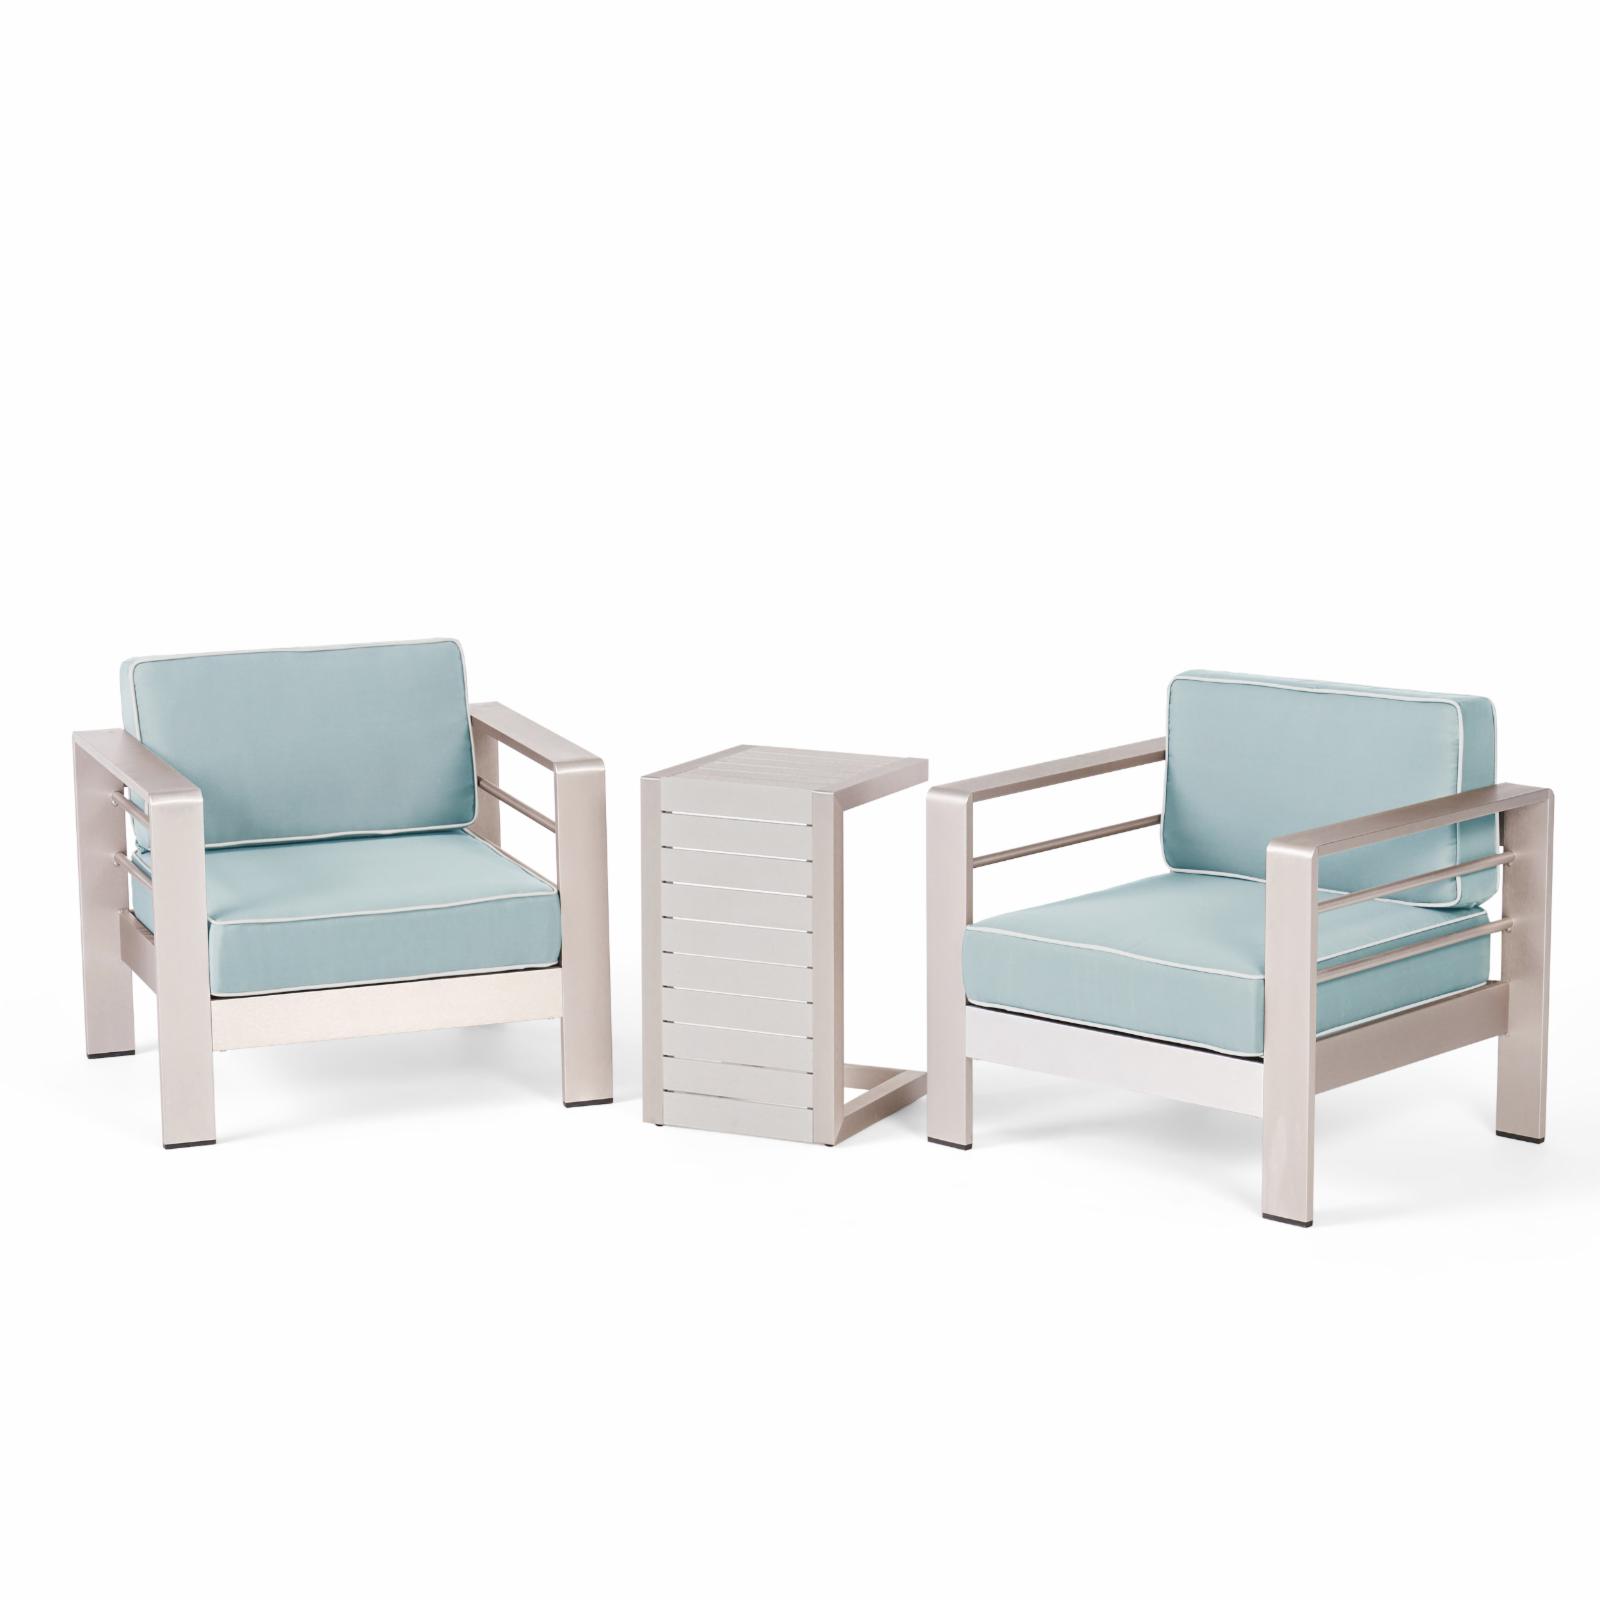 Xane Outdoor Club Chairs with Side Table - Aluminum and Khaki - image 4 of 10